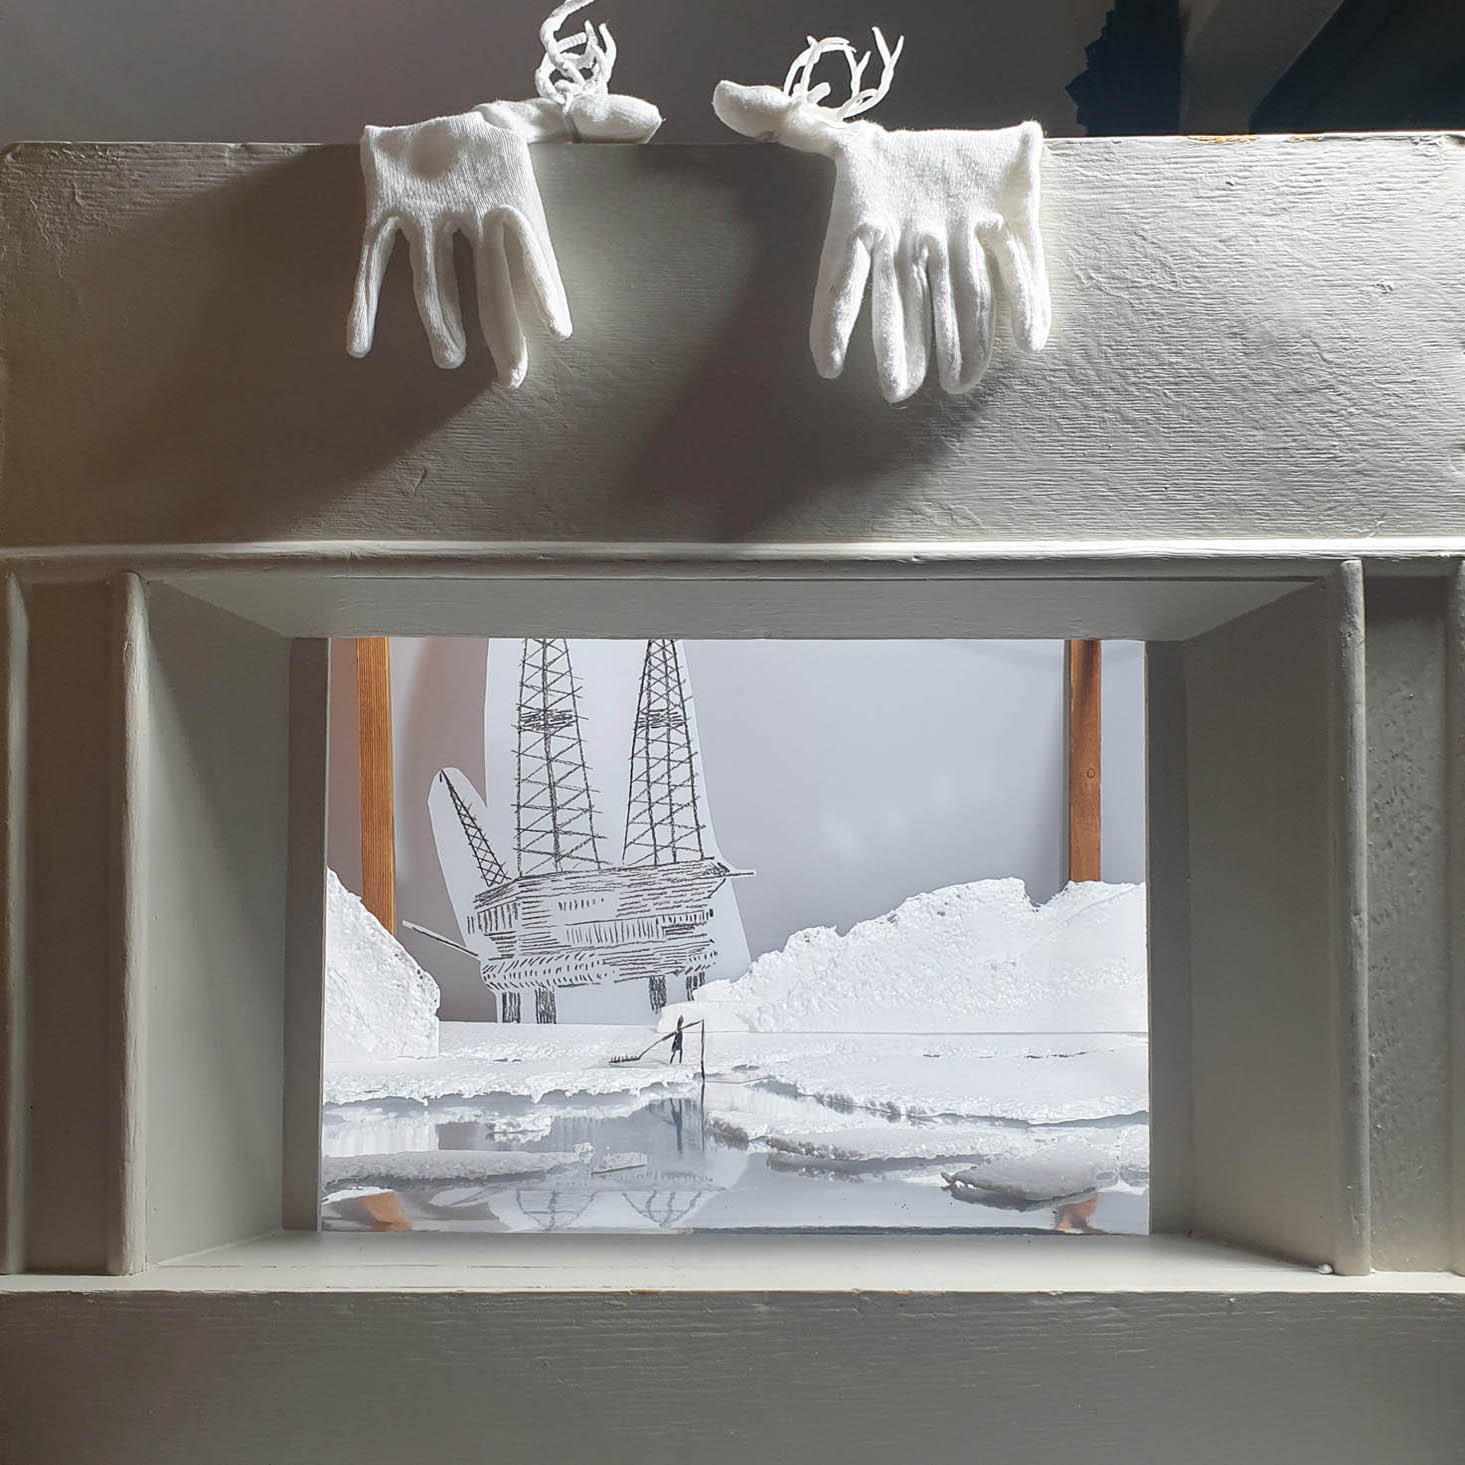 vintage model theatre with white gloves made to look like reindeer on the top and artic scenes inside made of polystyrene packaging, silver card and drawings